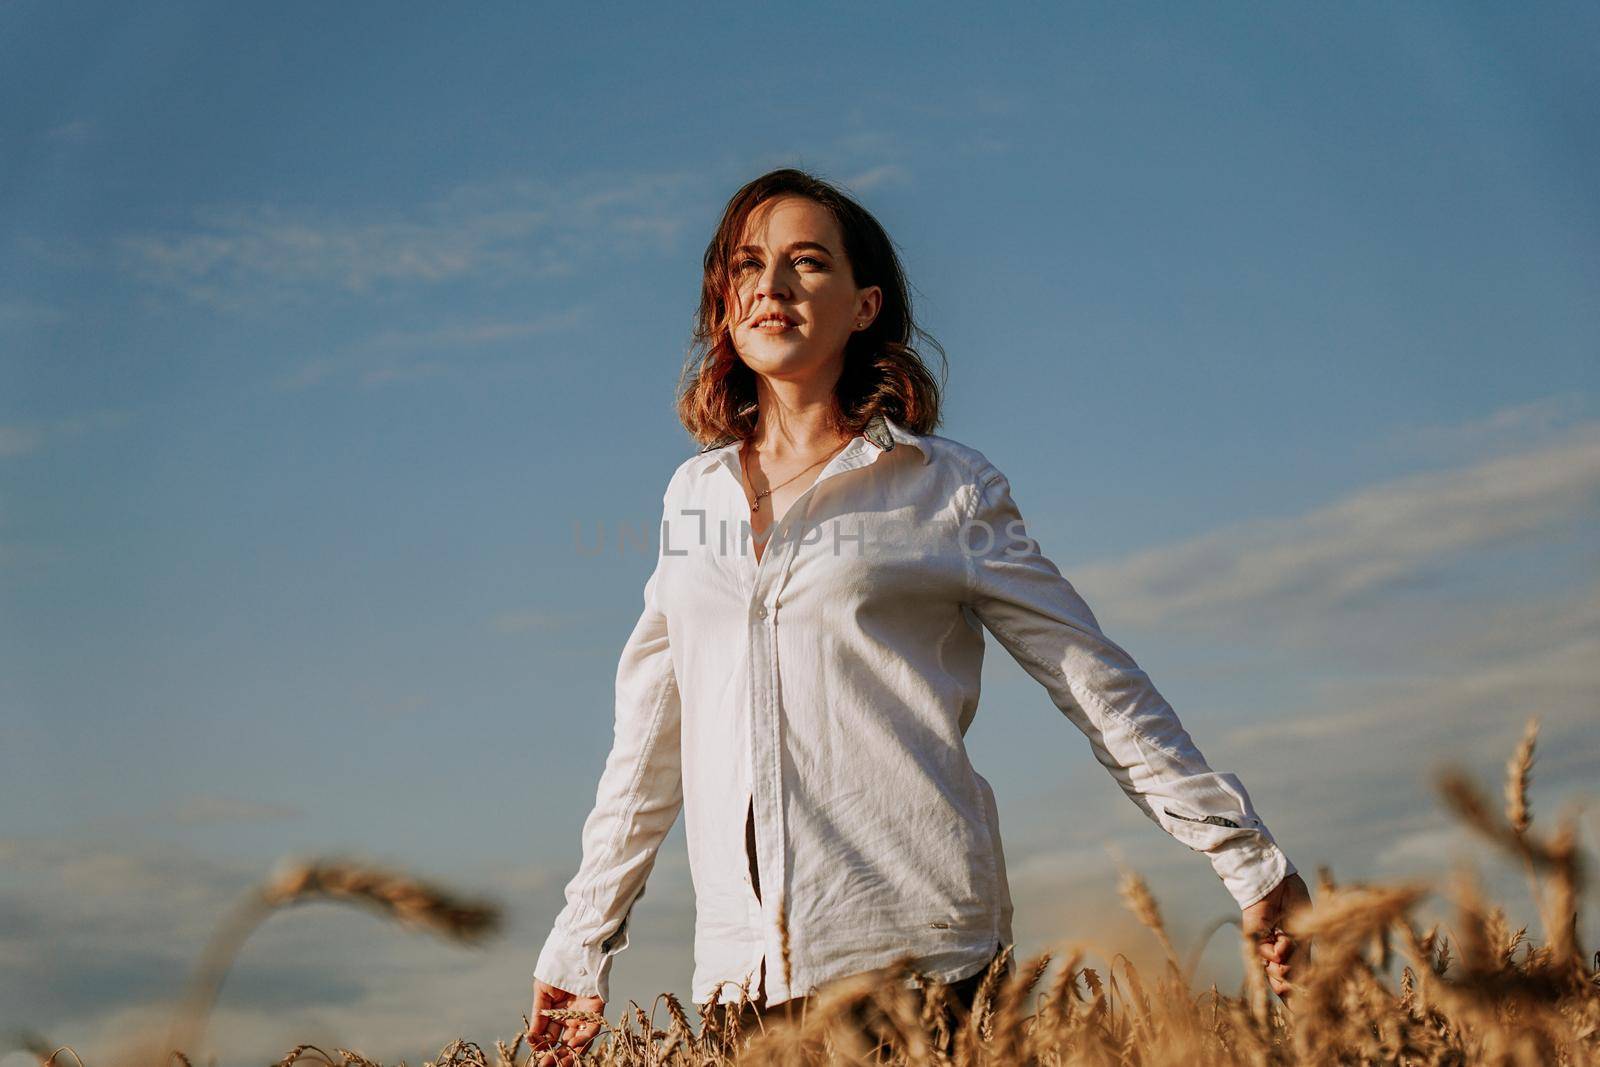 Happy young woman in a white shirt in a wheat field. Sunny day. Girl smiling, happiness concept. Hands to the side